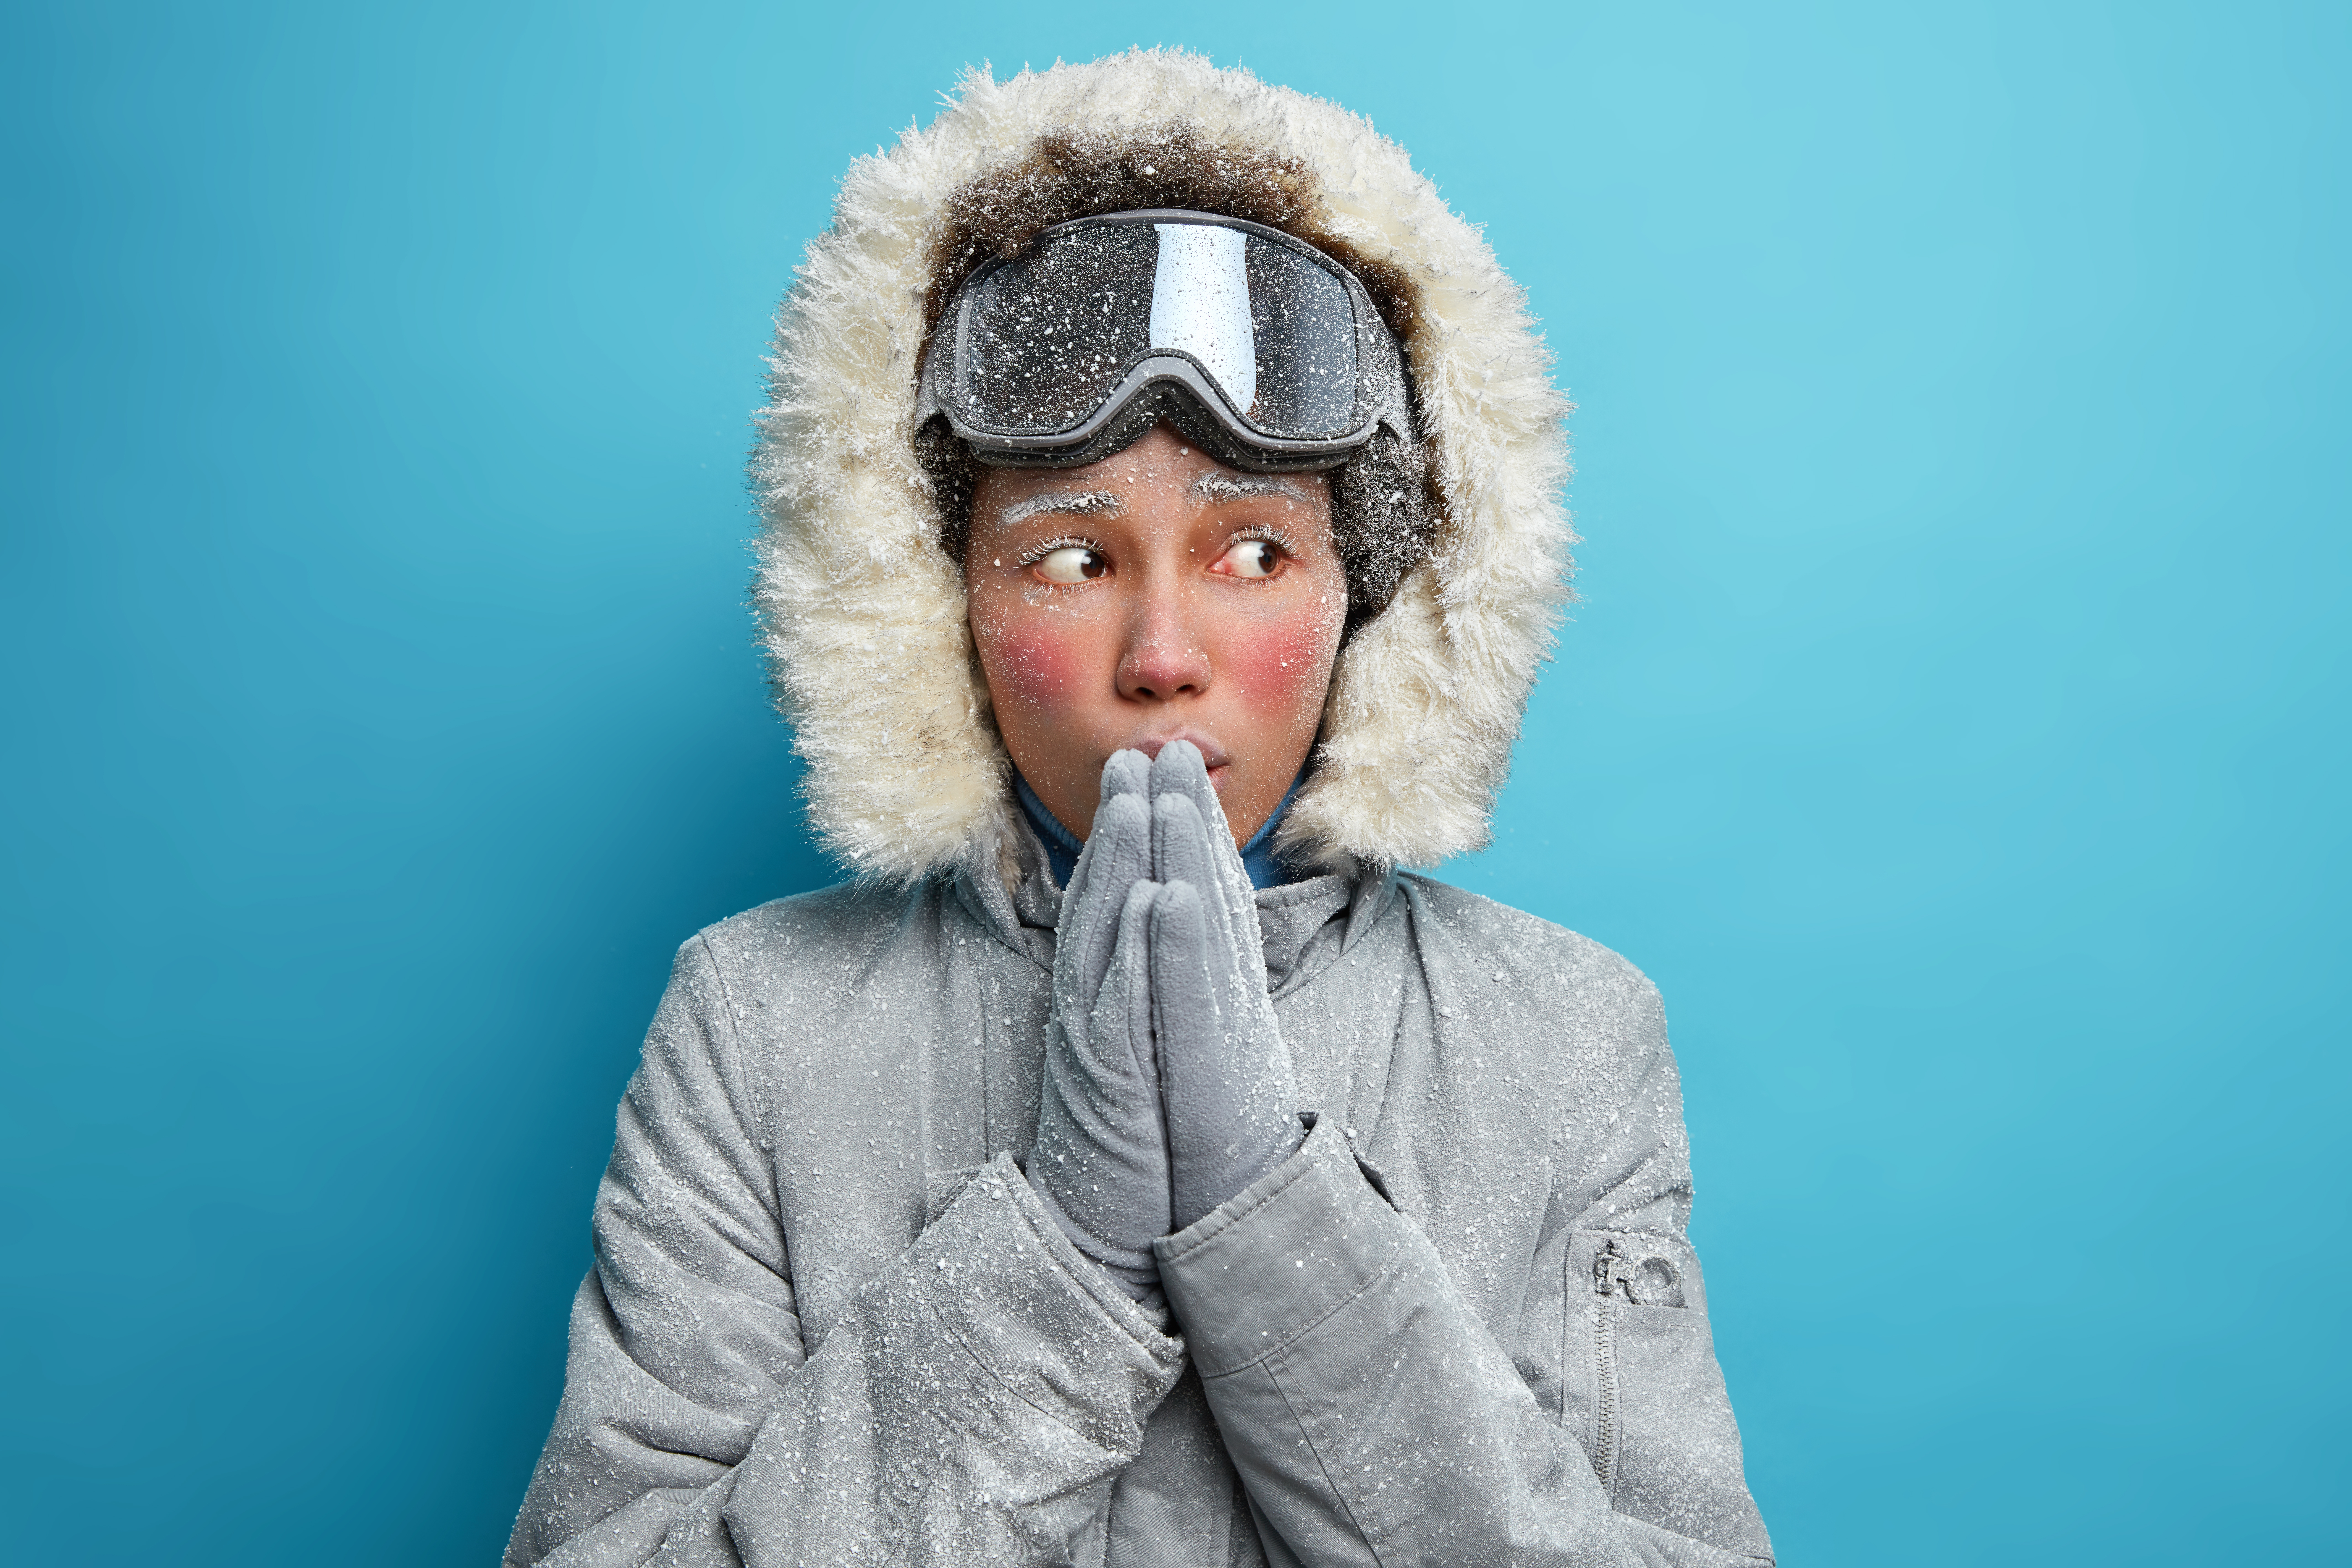 Hypothermia: What Is, Causes, Symptoms, Treatment